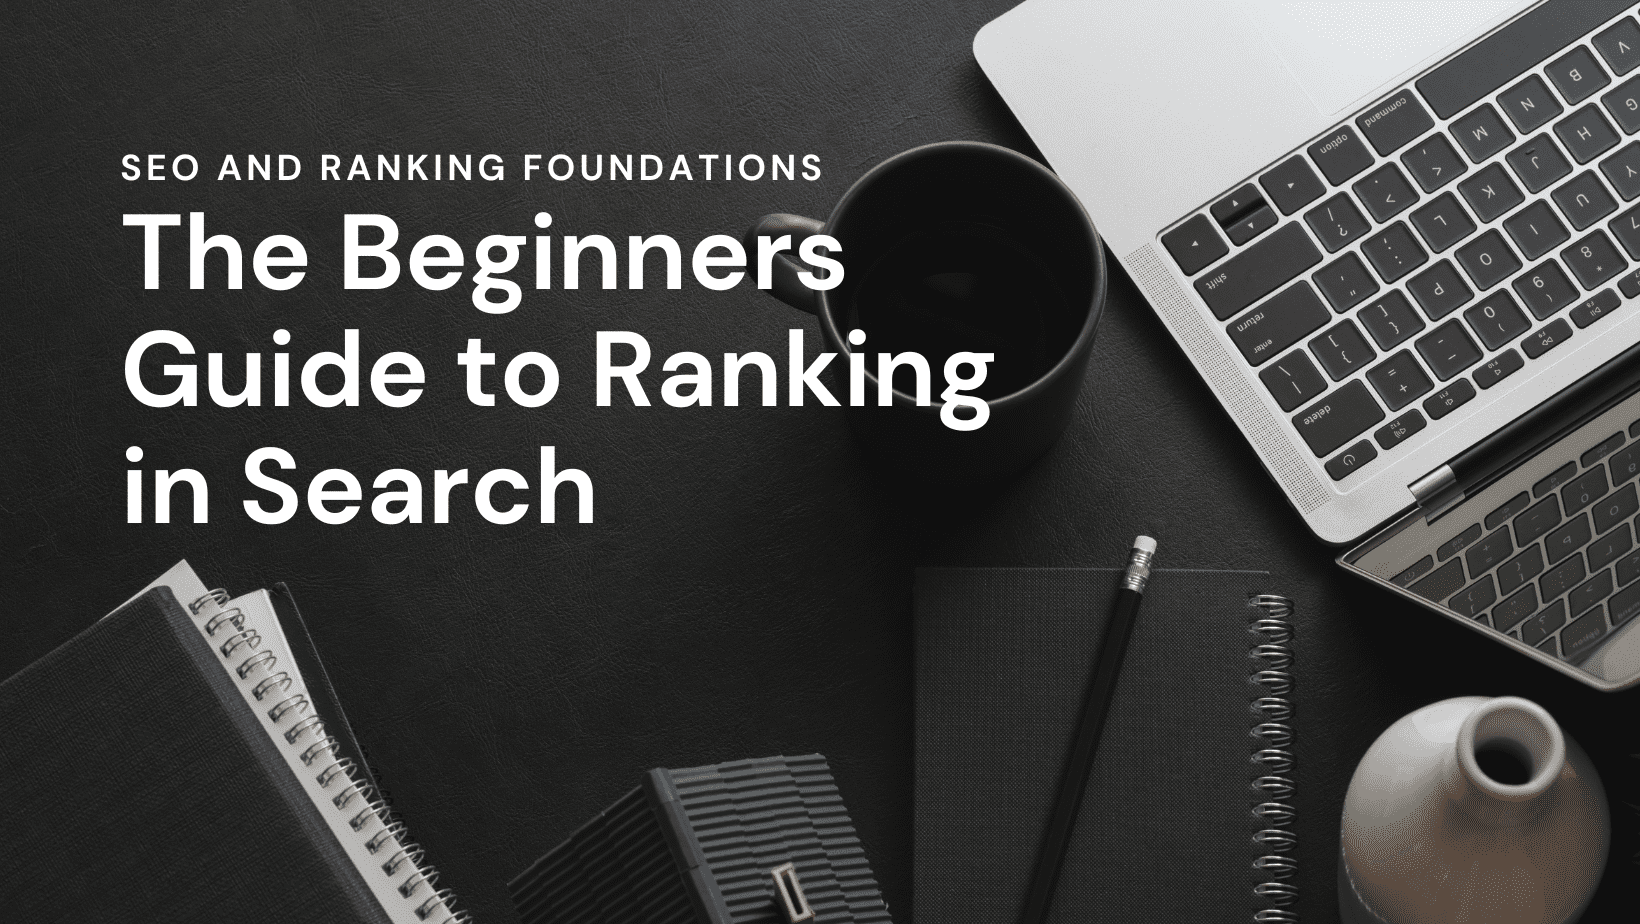 SEO and Ranking Foundations The Beginners Guide to Ranking in Search